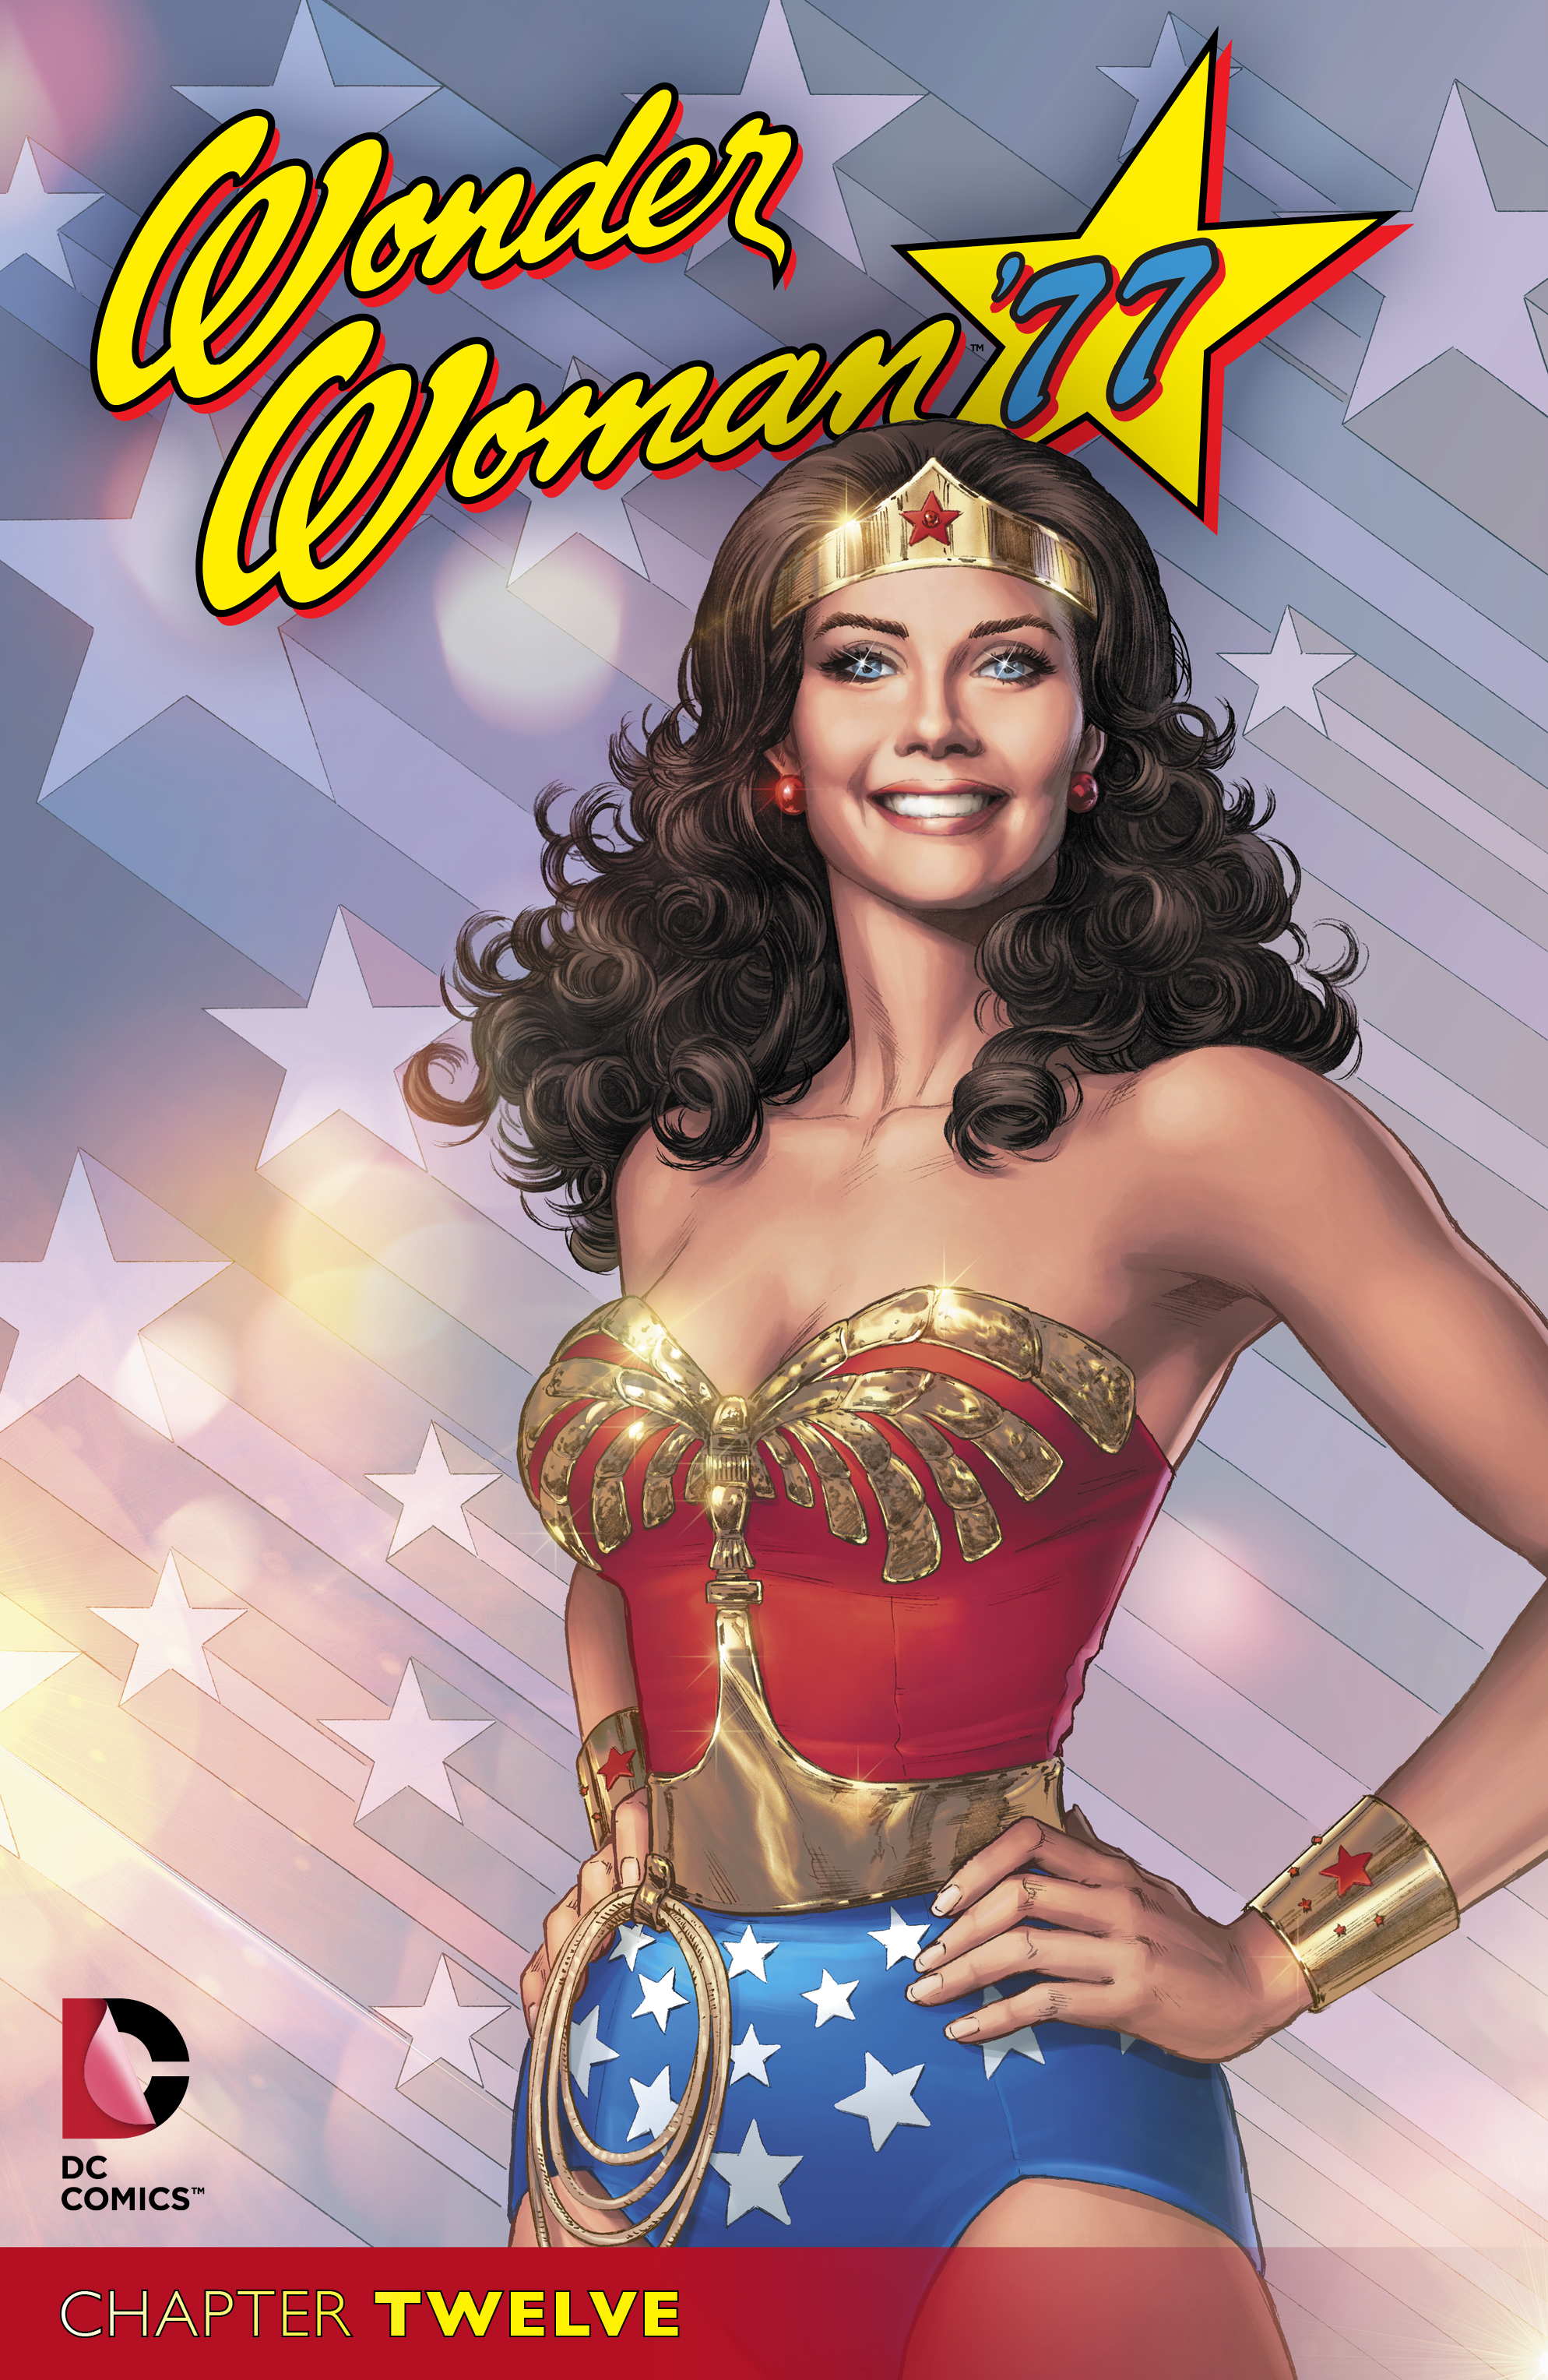 Wonder Woman '77 #12 preview images